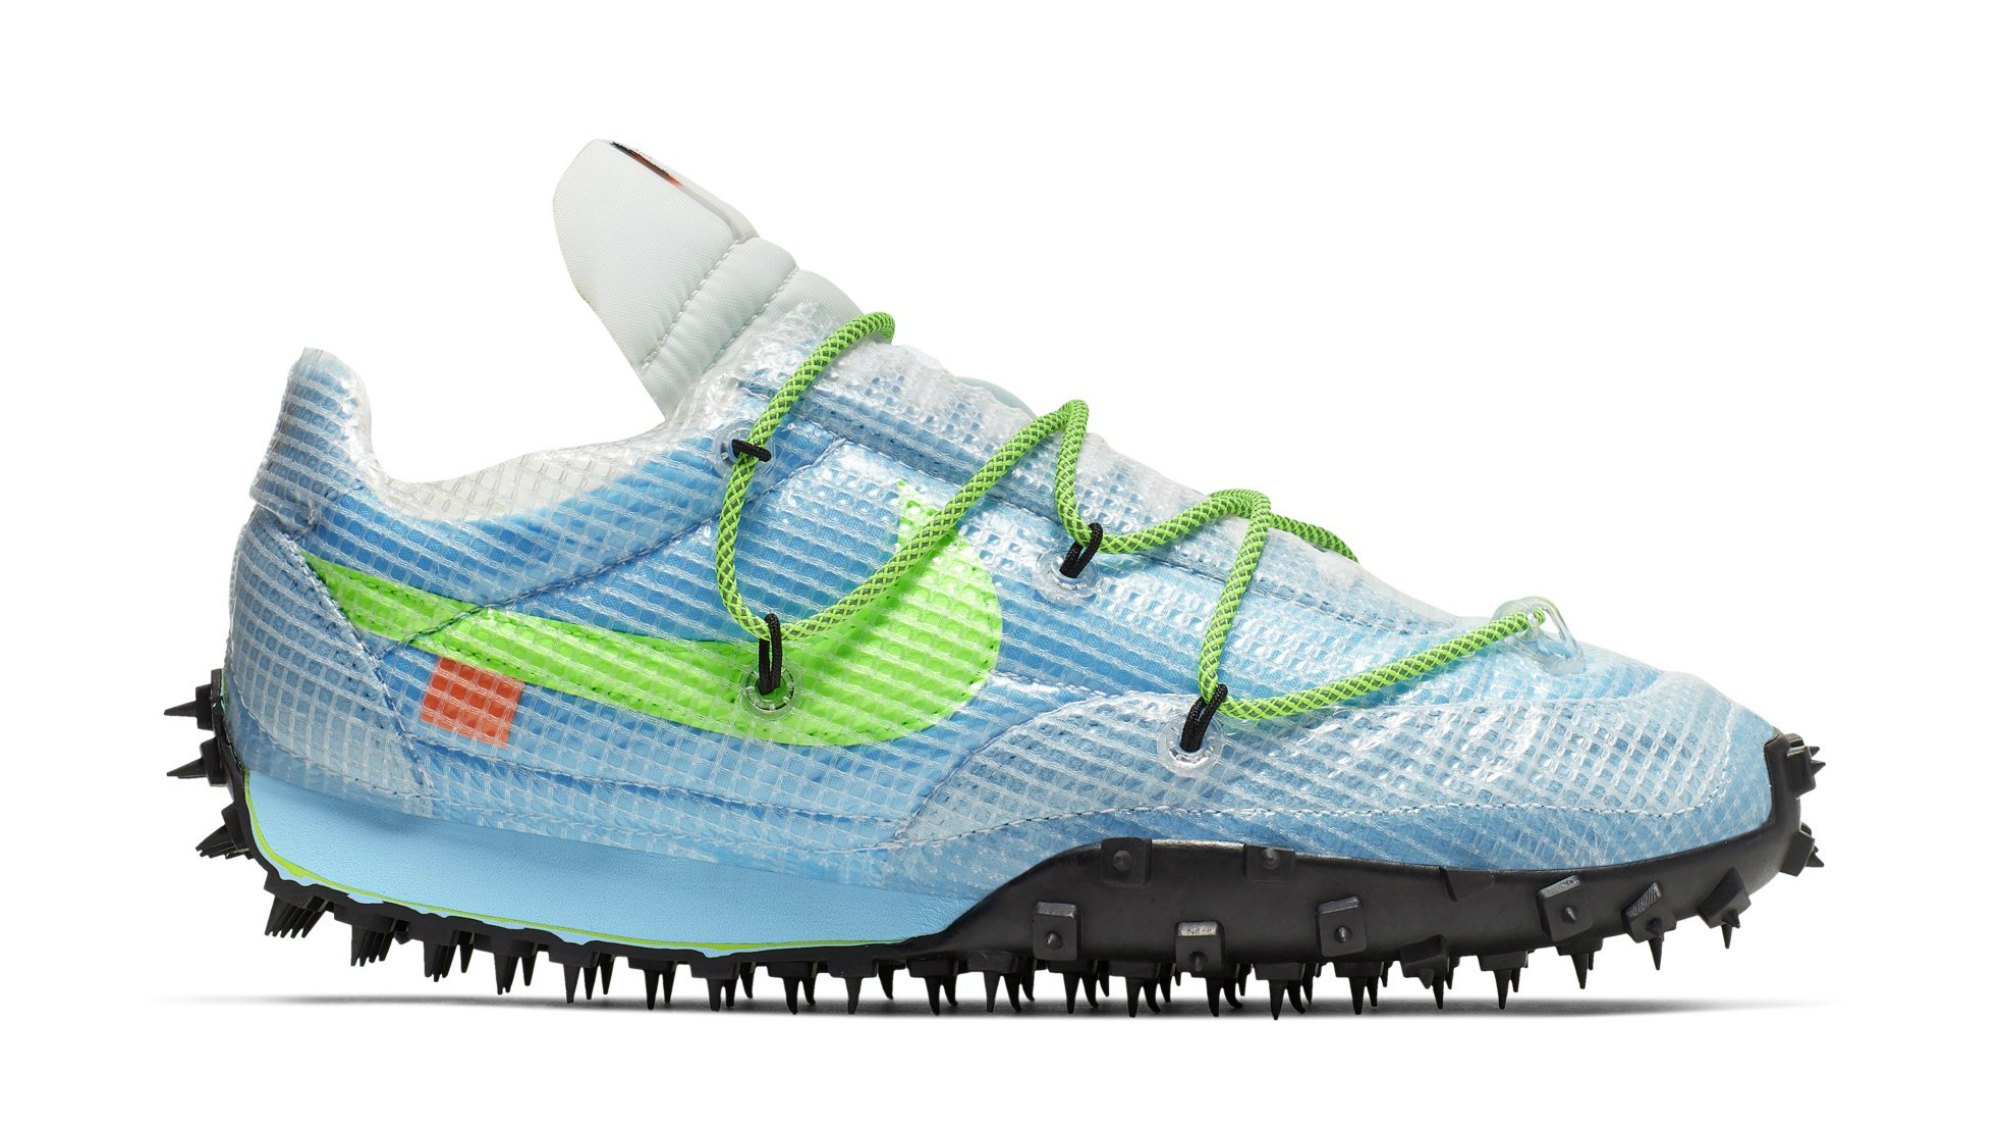 off white nike waffle racer vivid sky cd8180 400 release date